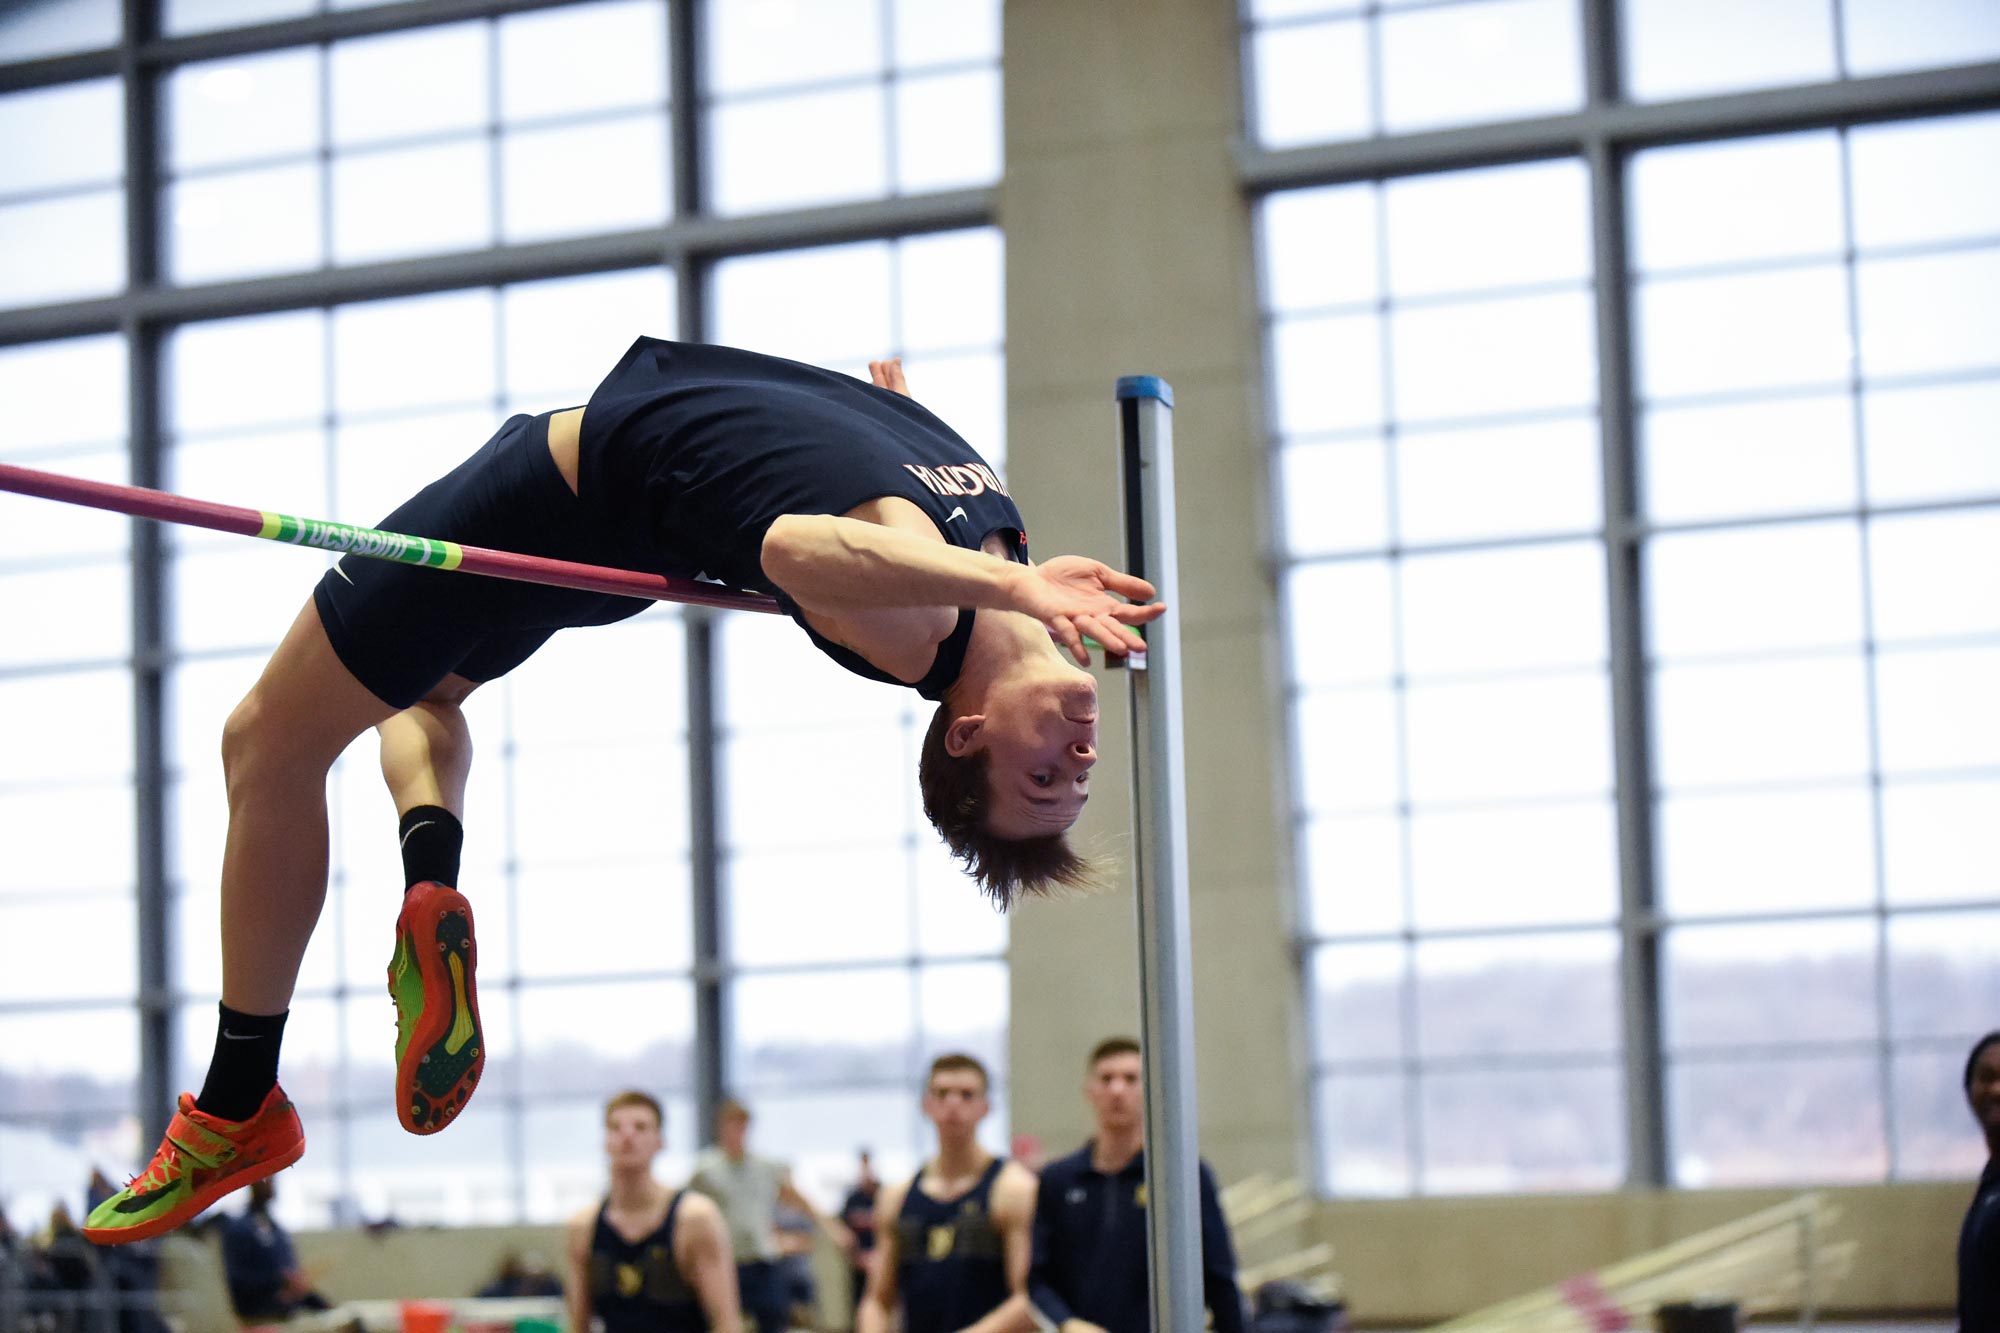 Brenton Foster bending backwards as he jumps over a pole during high jump